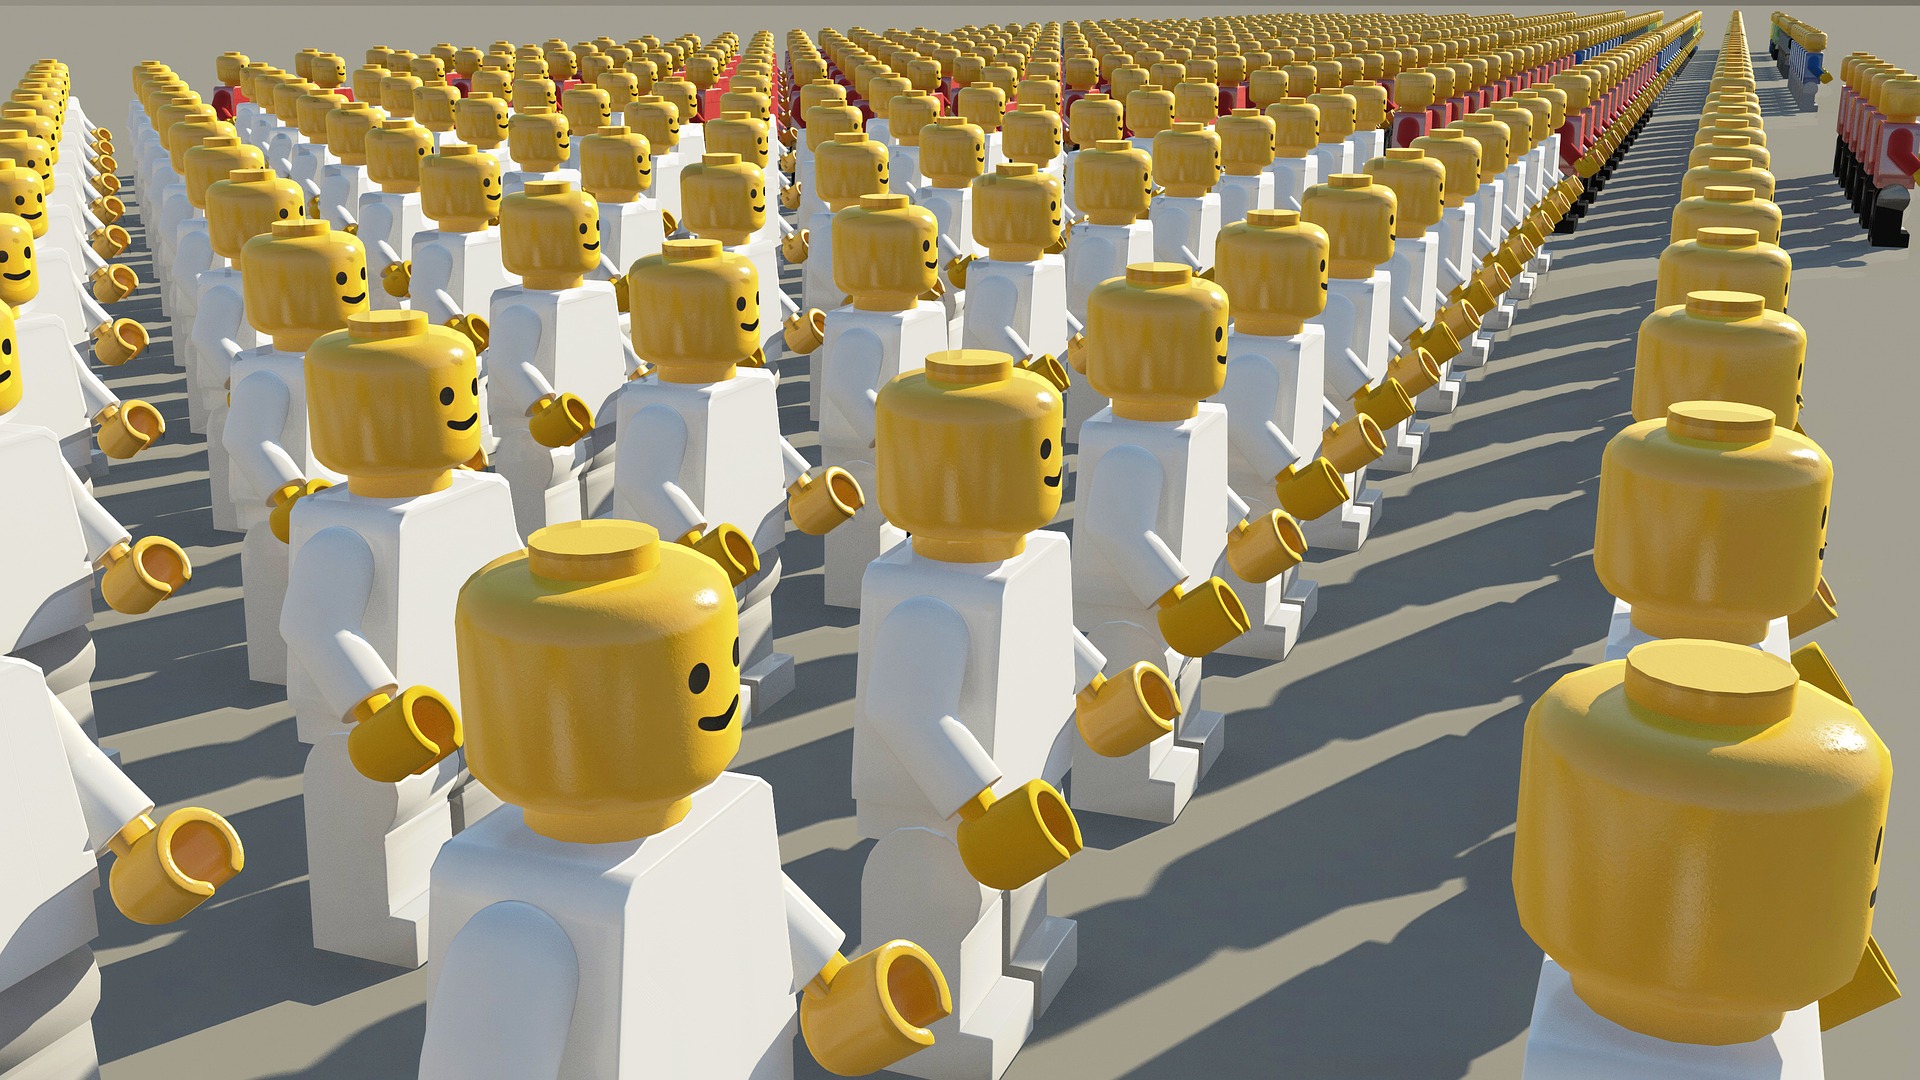 An "army" of lego figures